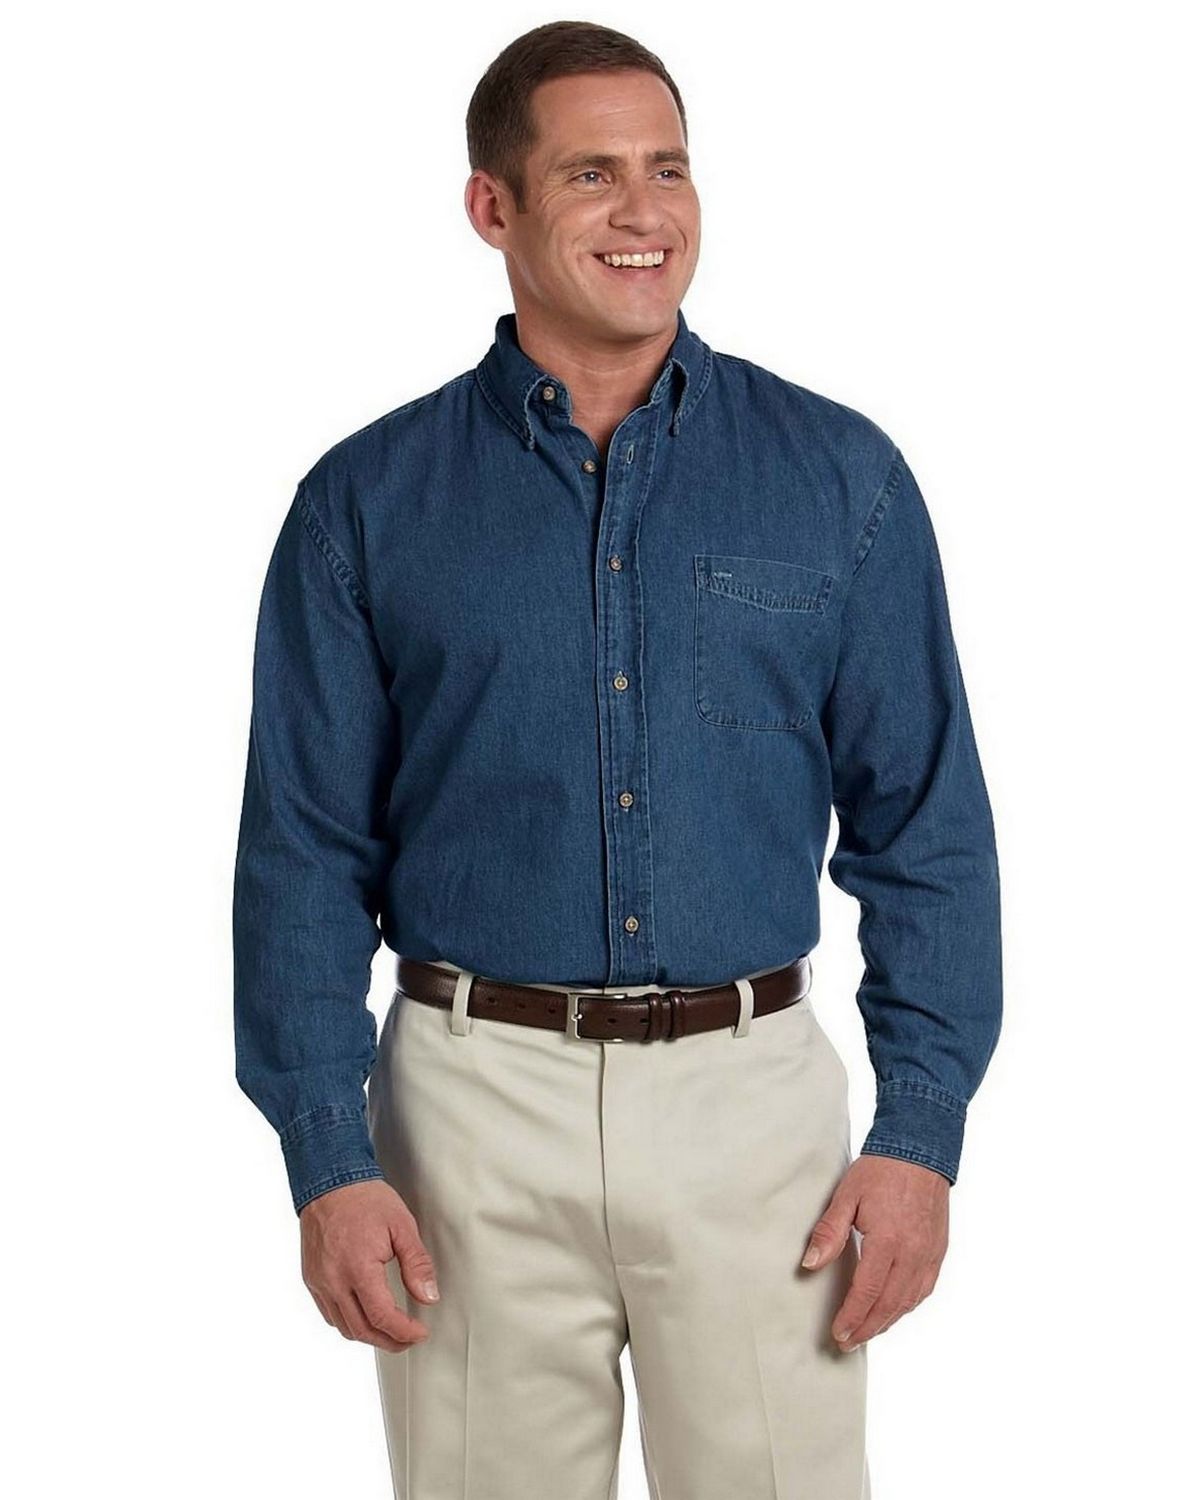 What can I pair with a denim over shirt? I have no idea what colours go  with it. : r/mensfashionadvice